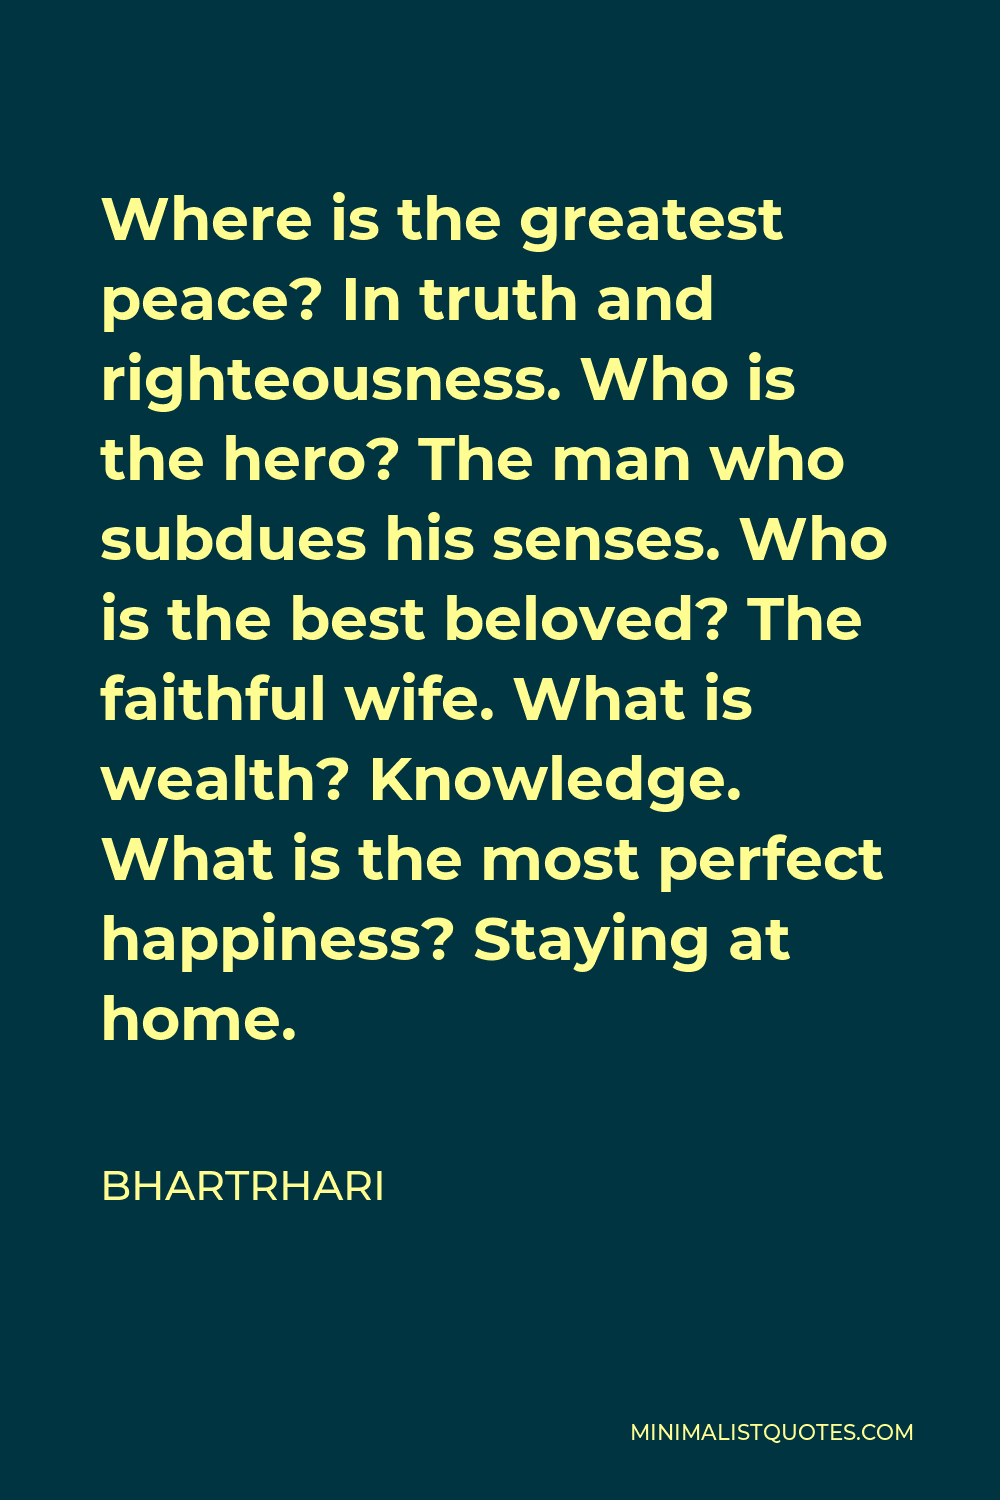 Bhartrhari Quote - Where is the greatest peace? In truth and righteousness. Who is the hero? The man who subdues his senses. Who is the best beloved? The faithful wife. What is wealth? Knowledge. What is the most perfect happiness? Staying at home.